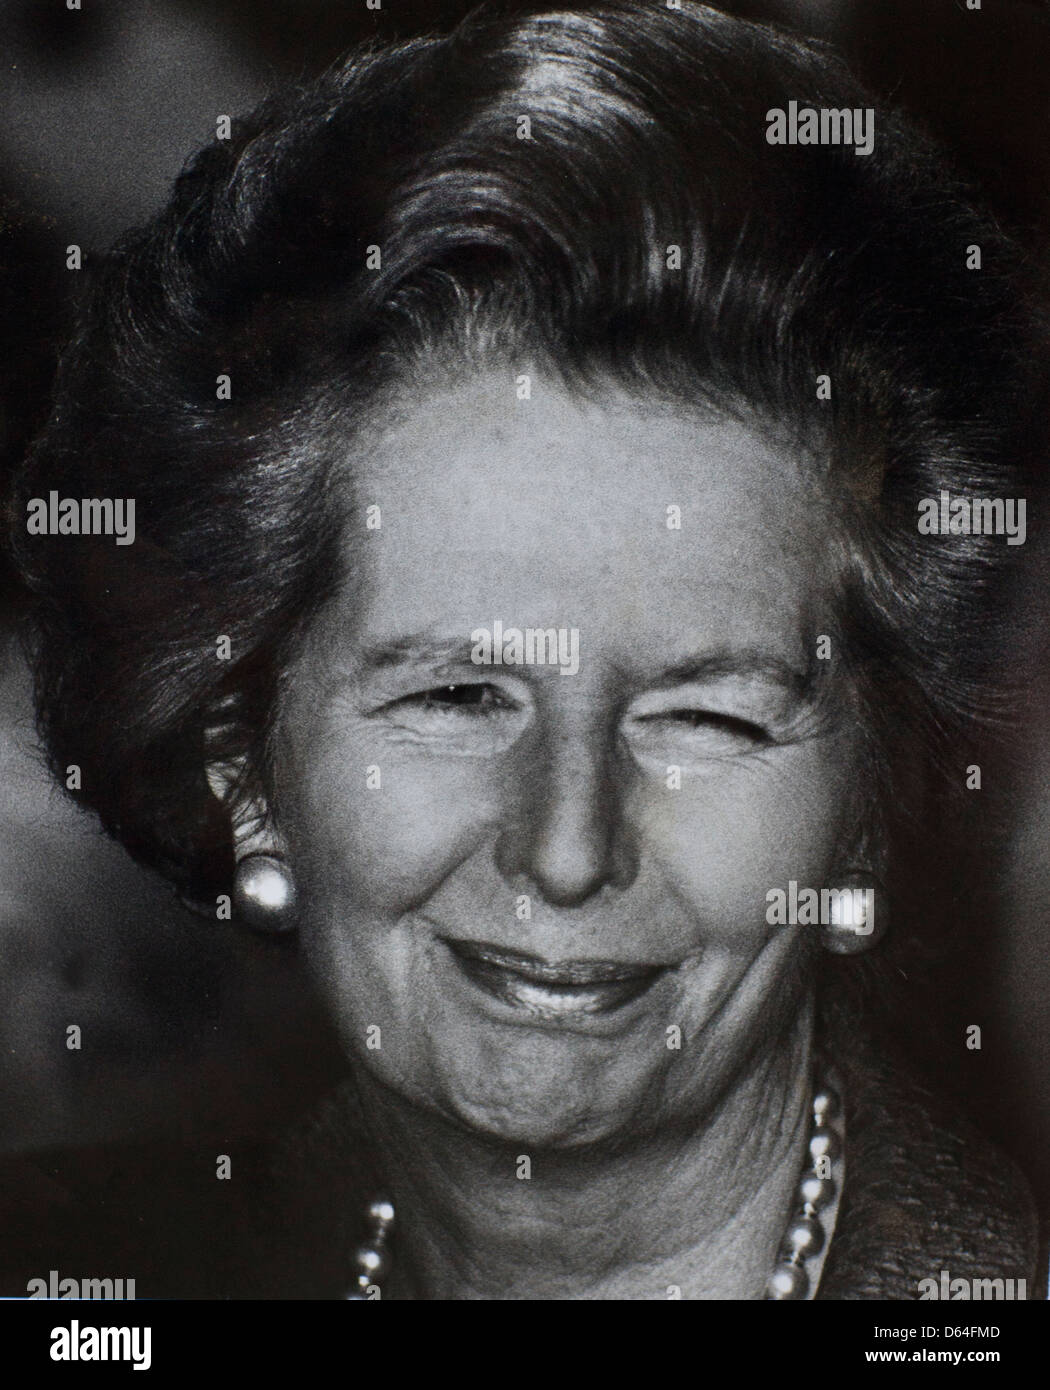 Margaret Thatcher in pearls Stock Photo - Alamy